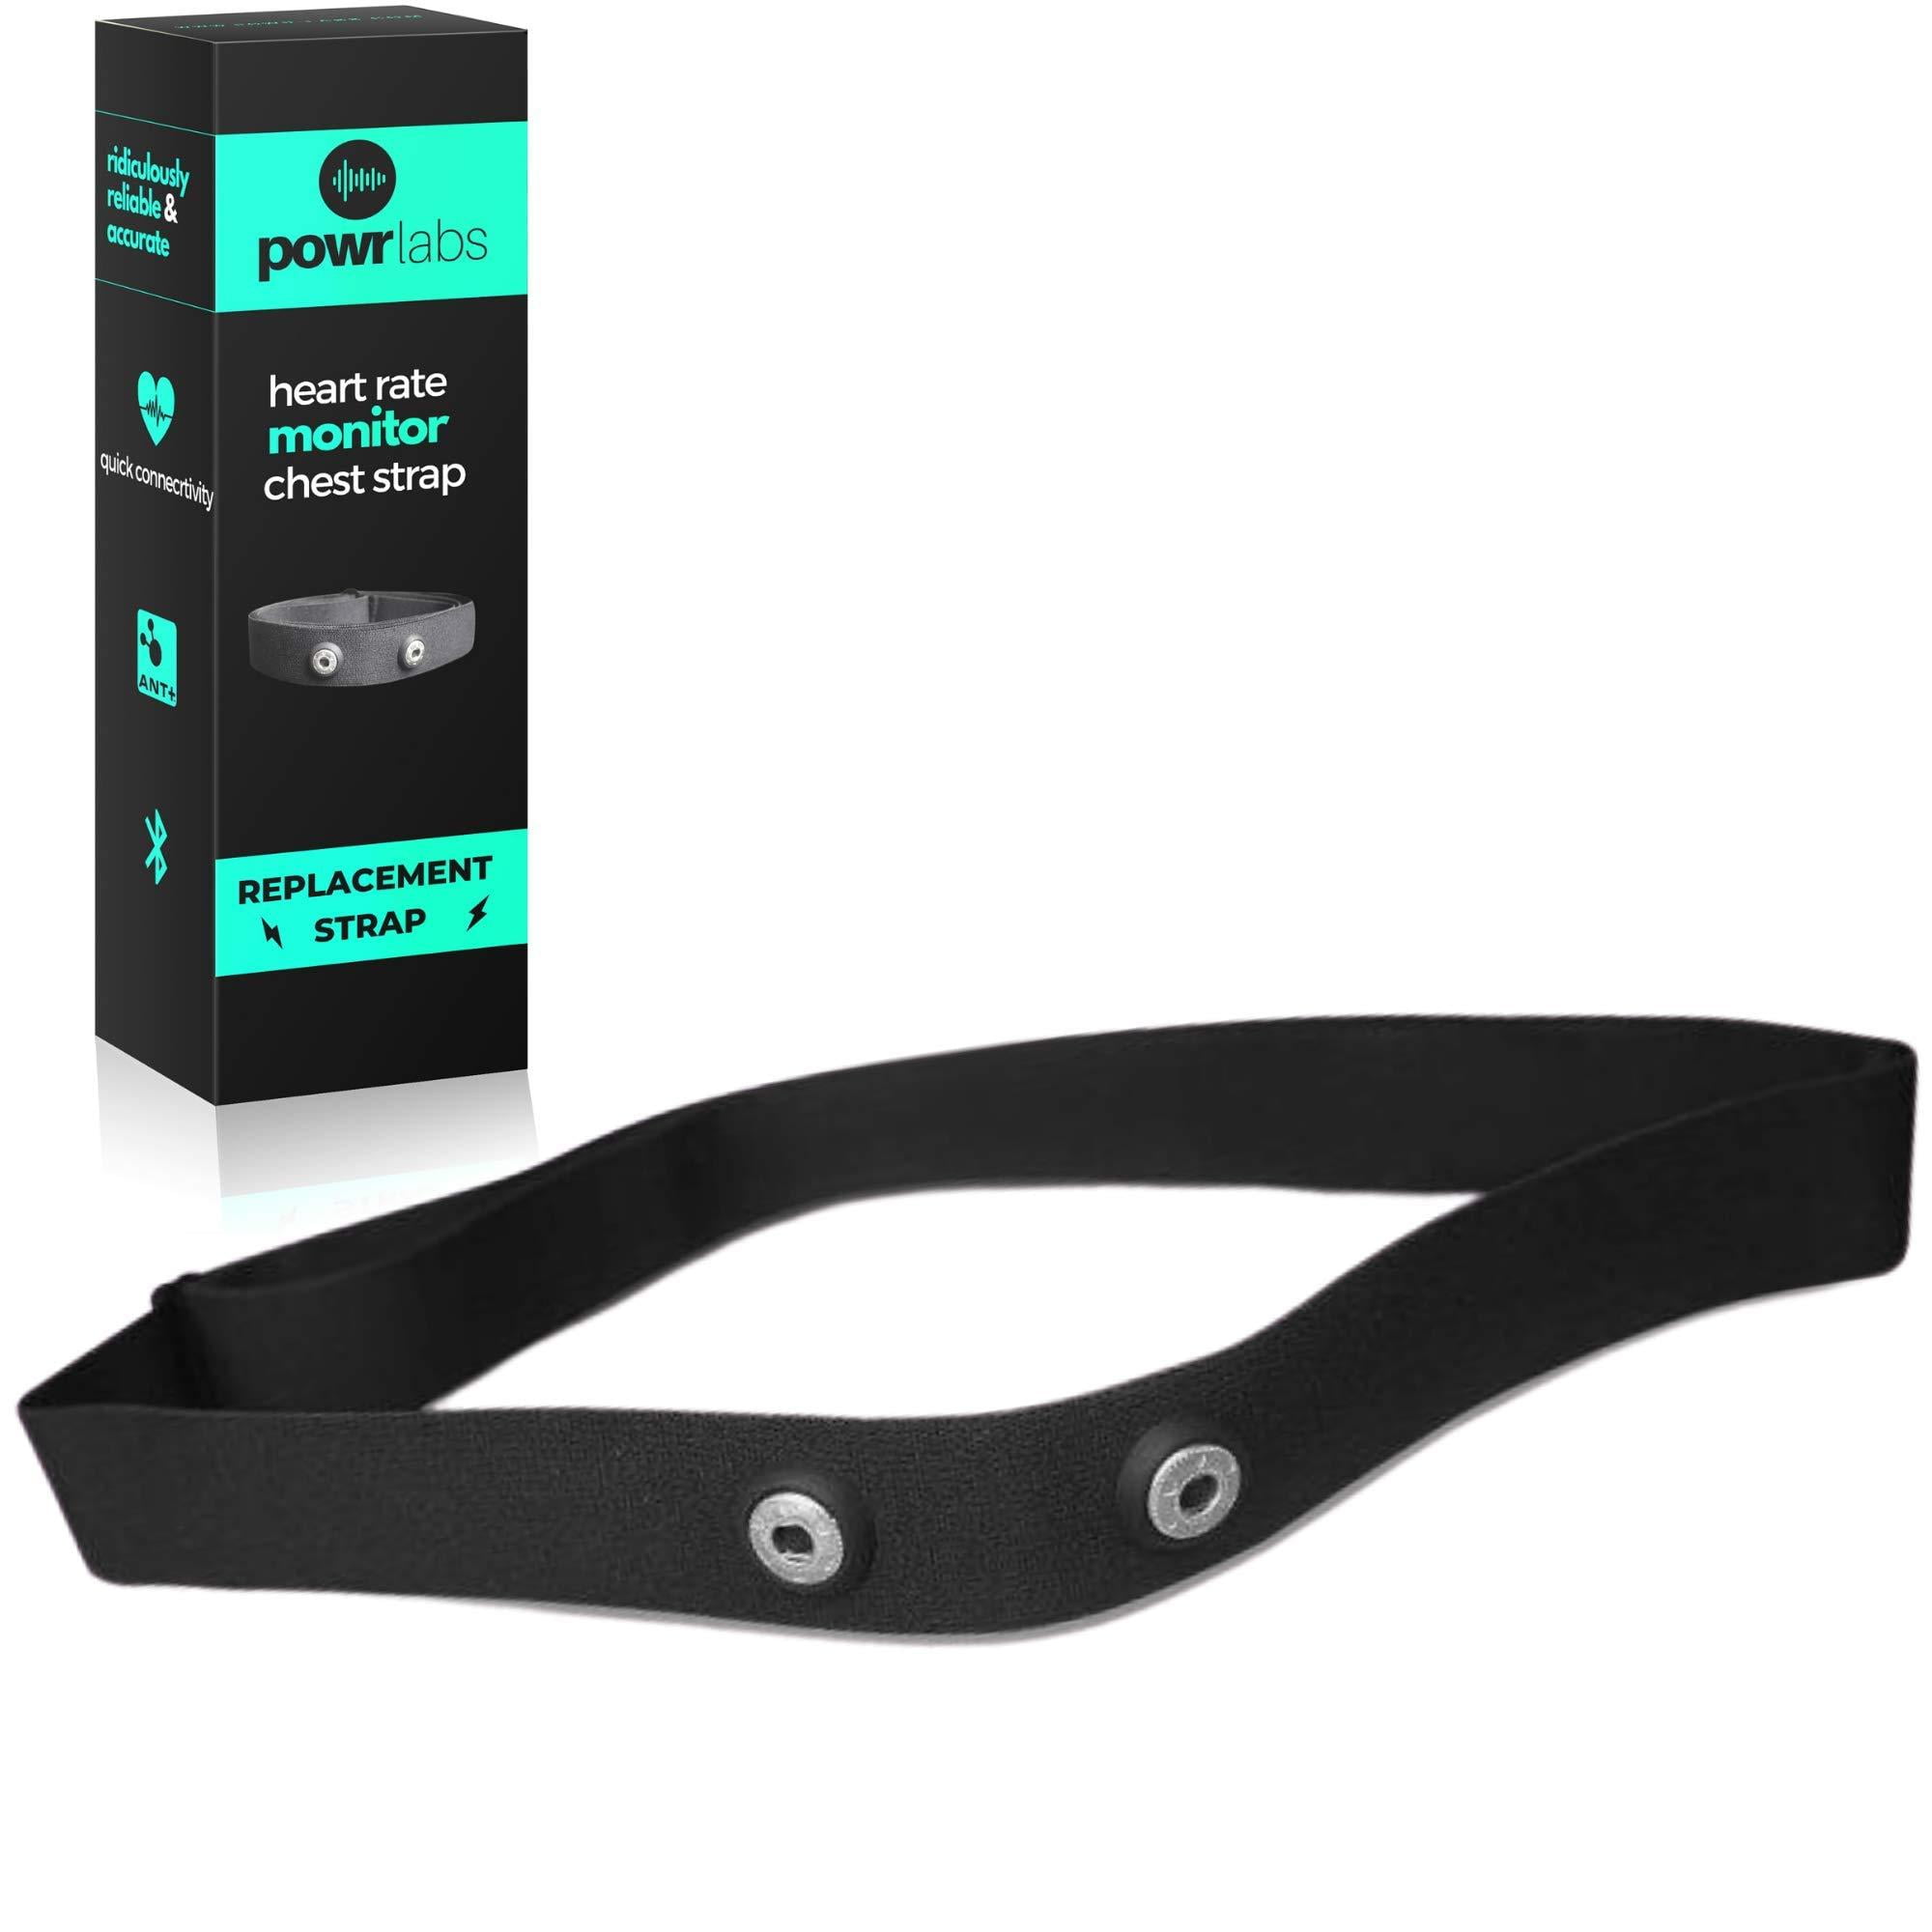 Garmin Replacement Soft Strap for Premium Heart Rate Frustration Free Packaging 